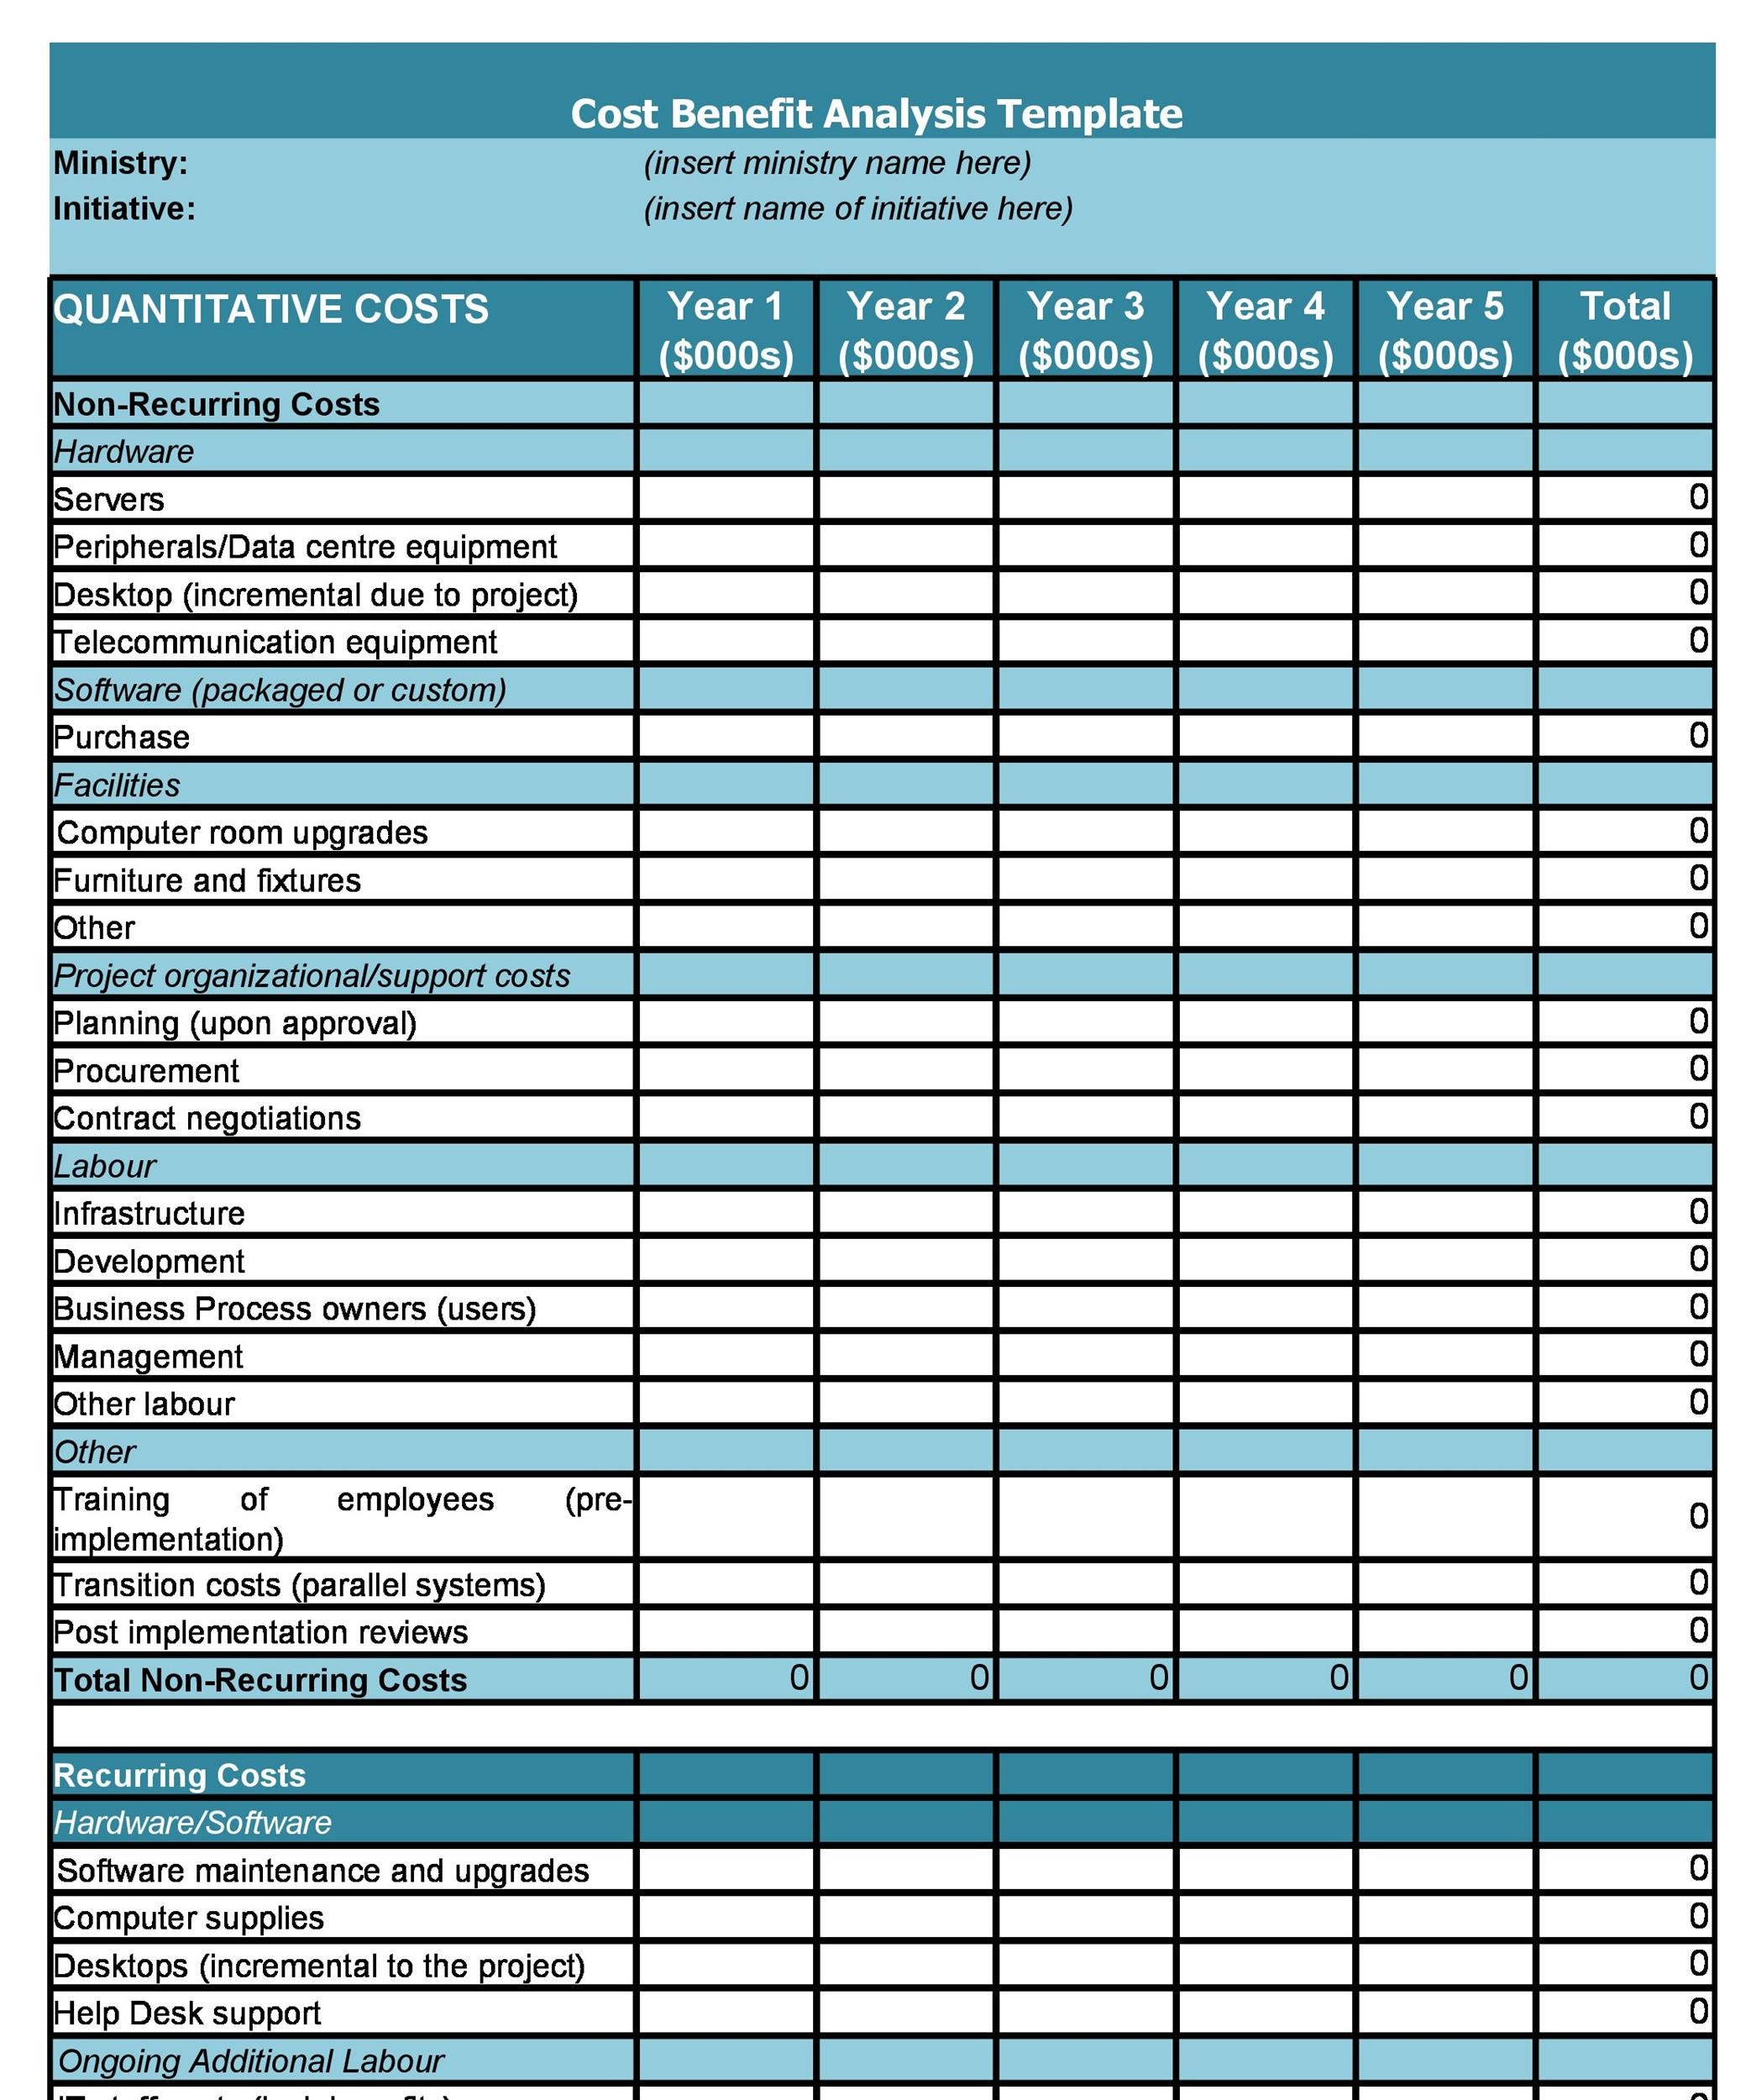 40+ Cost Benefit Analysis Templates & Examples! ᐅ TemplateLab